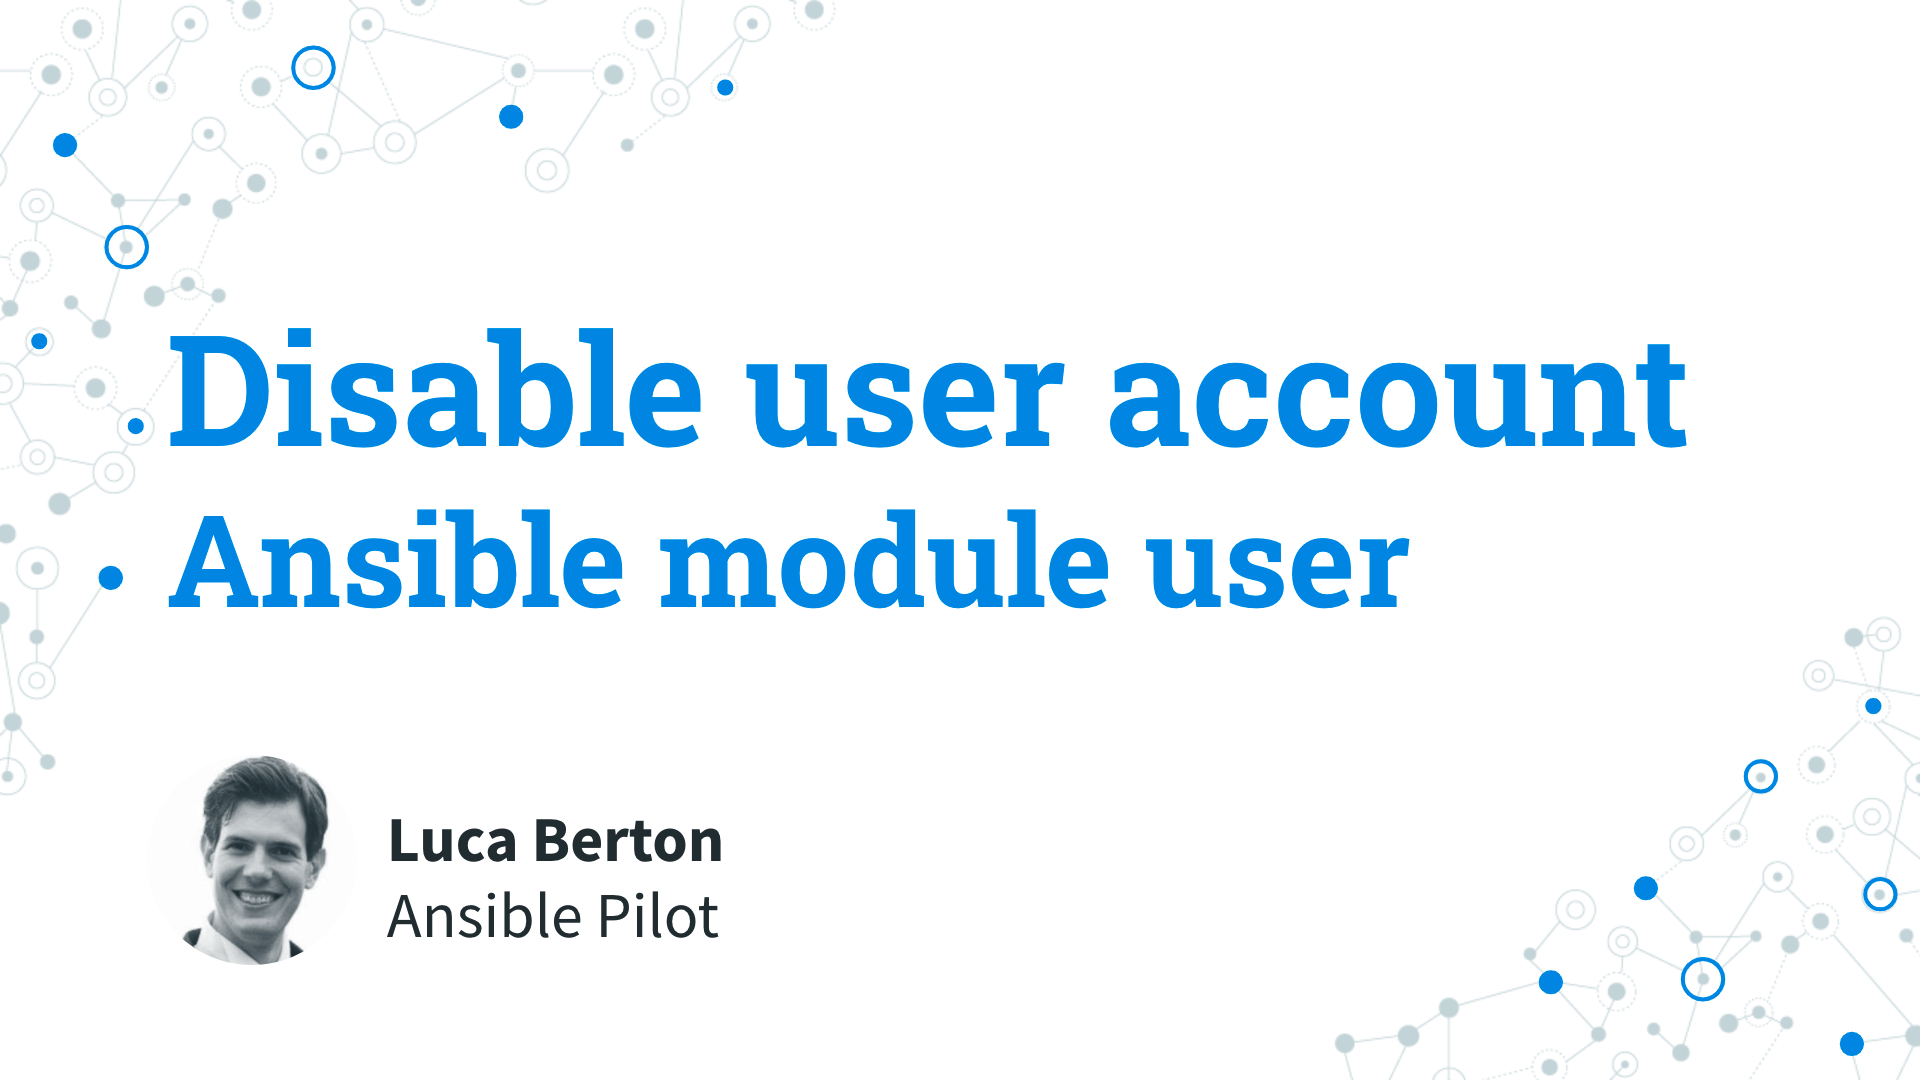 Disable user account - Ansible module user